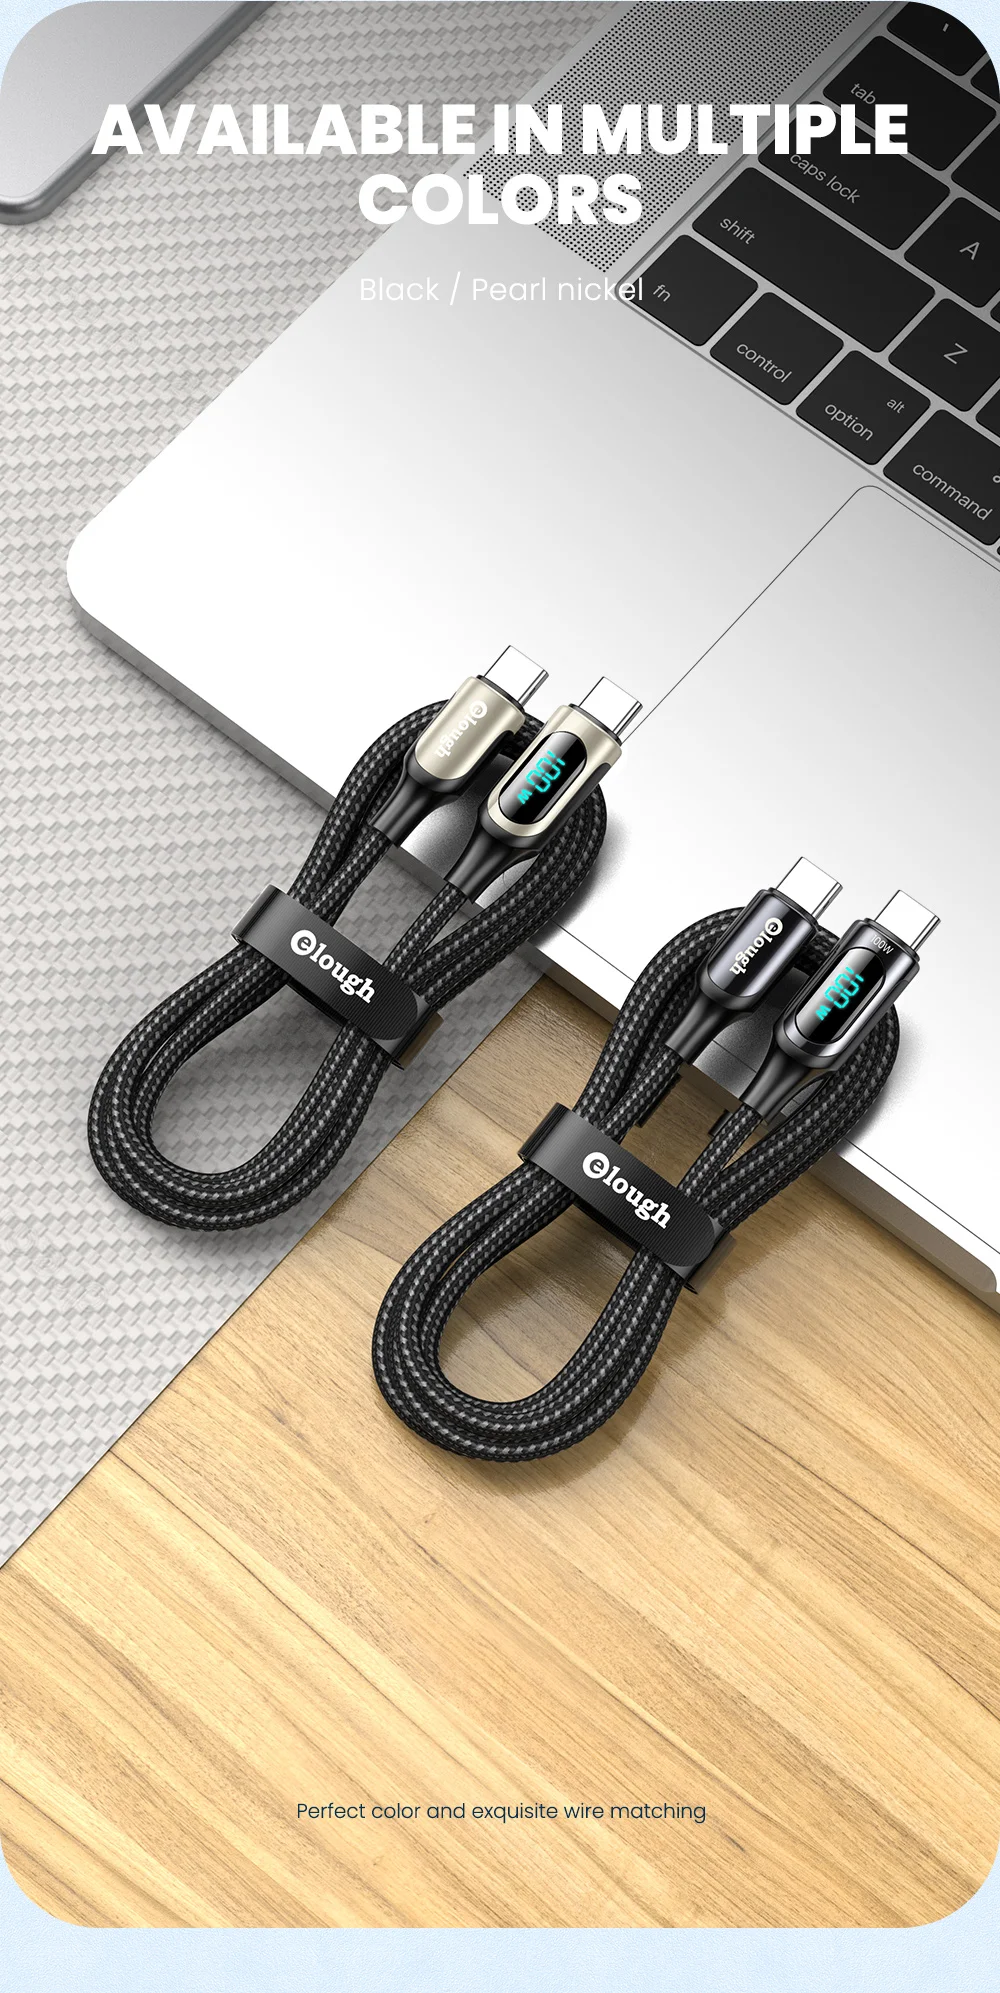 Elough LED 100W USB C To USB Type C Cable PD Quick Charge 4.0 Type-C Cable For Xiaomi POCO X3 Huawei Samsung Phone Charging Cord iphone cable